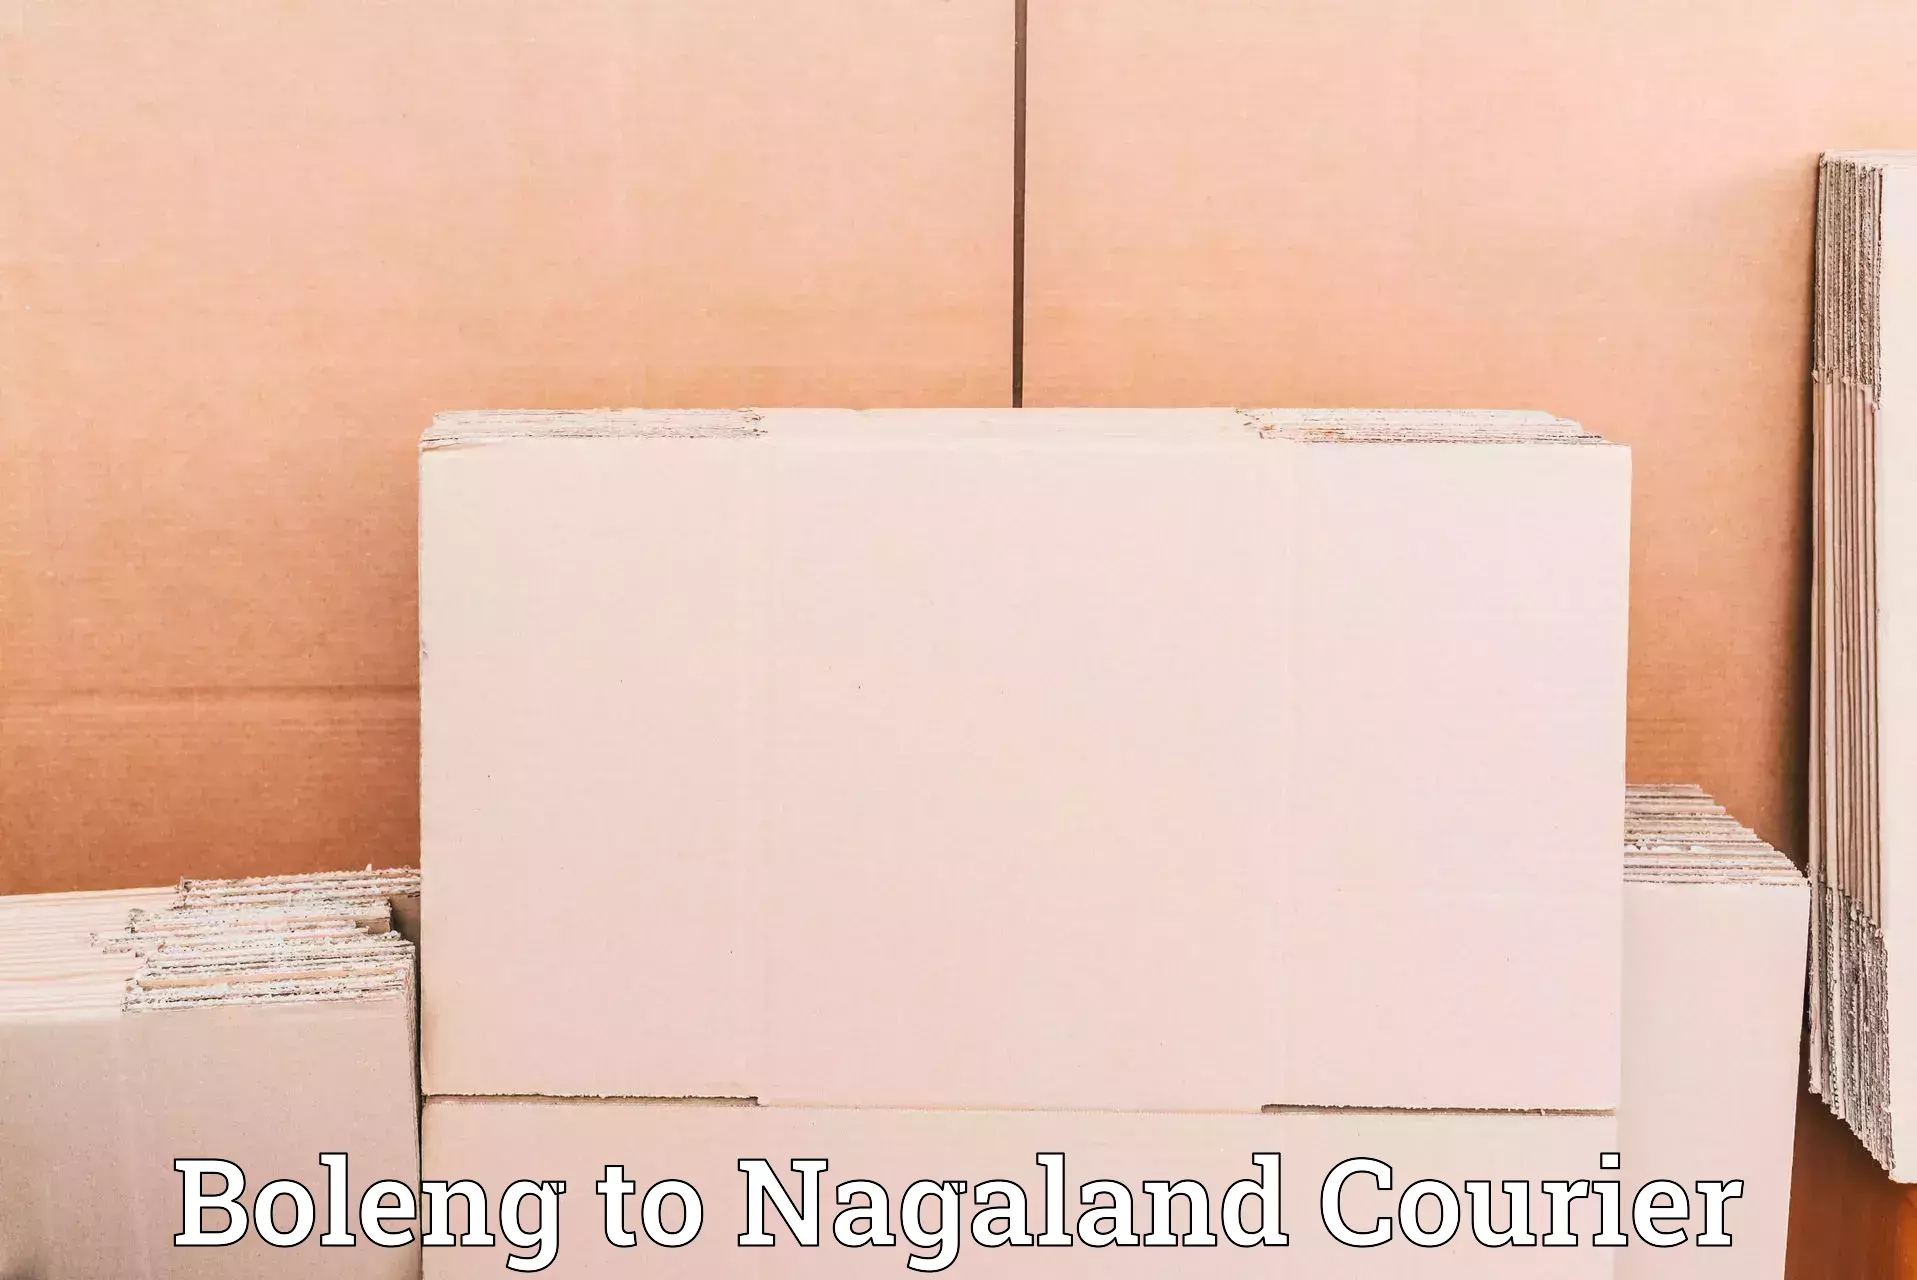 Automated parcel services Boleng to Nagaland